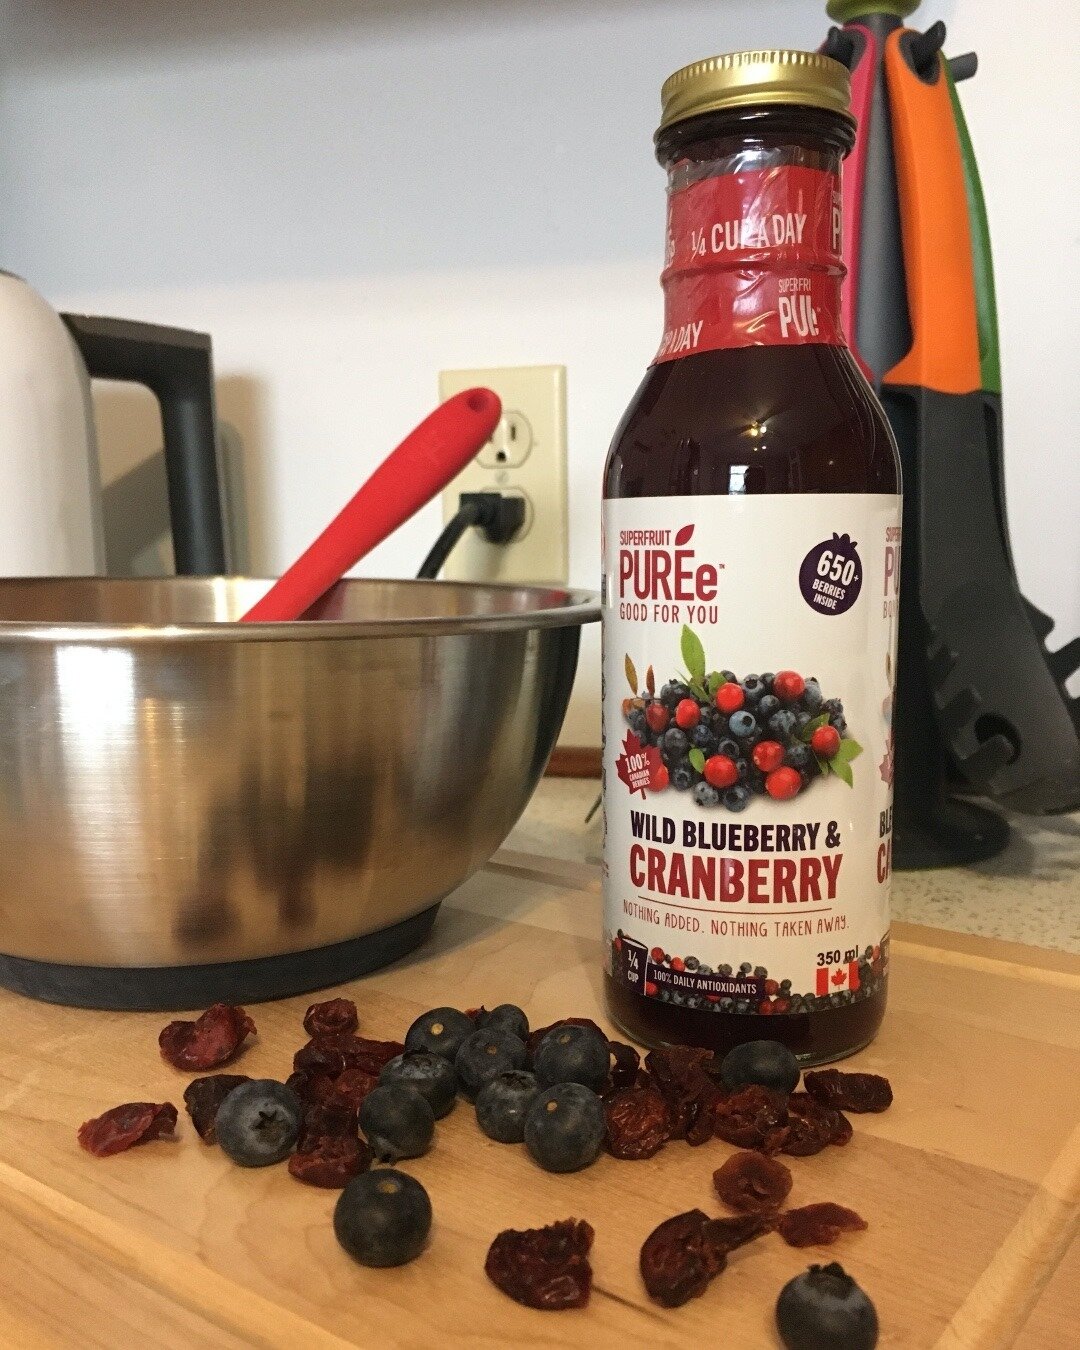 One for cooking with, one for drinking, one for pouring on pancakes and salad&hellip;💜✨

What do YOU use your handy dandy bottle(s) of pur&eacute;e for? 

#superfruitpuree #goodforyou #wildblueberries #strawberries #haskaps #cranberries #antioxidant